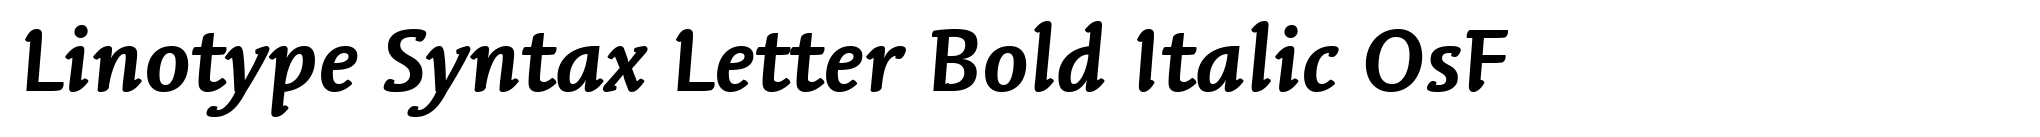 Linotype Syntax Letter Bold Italic OsF image